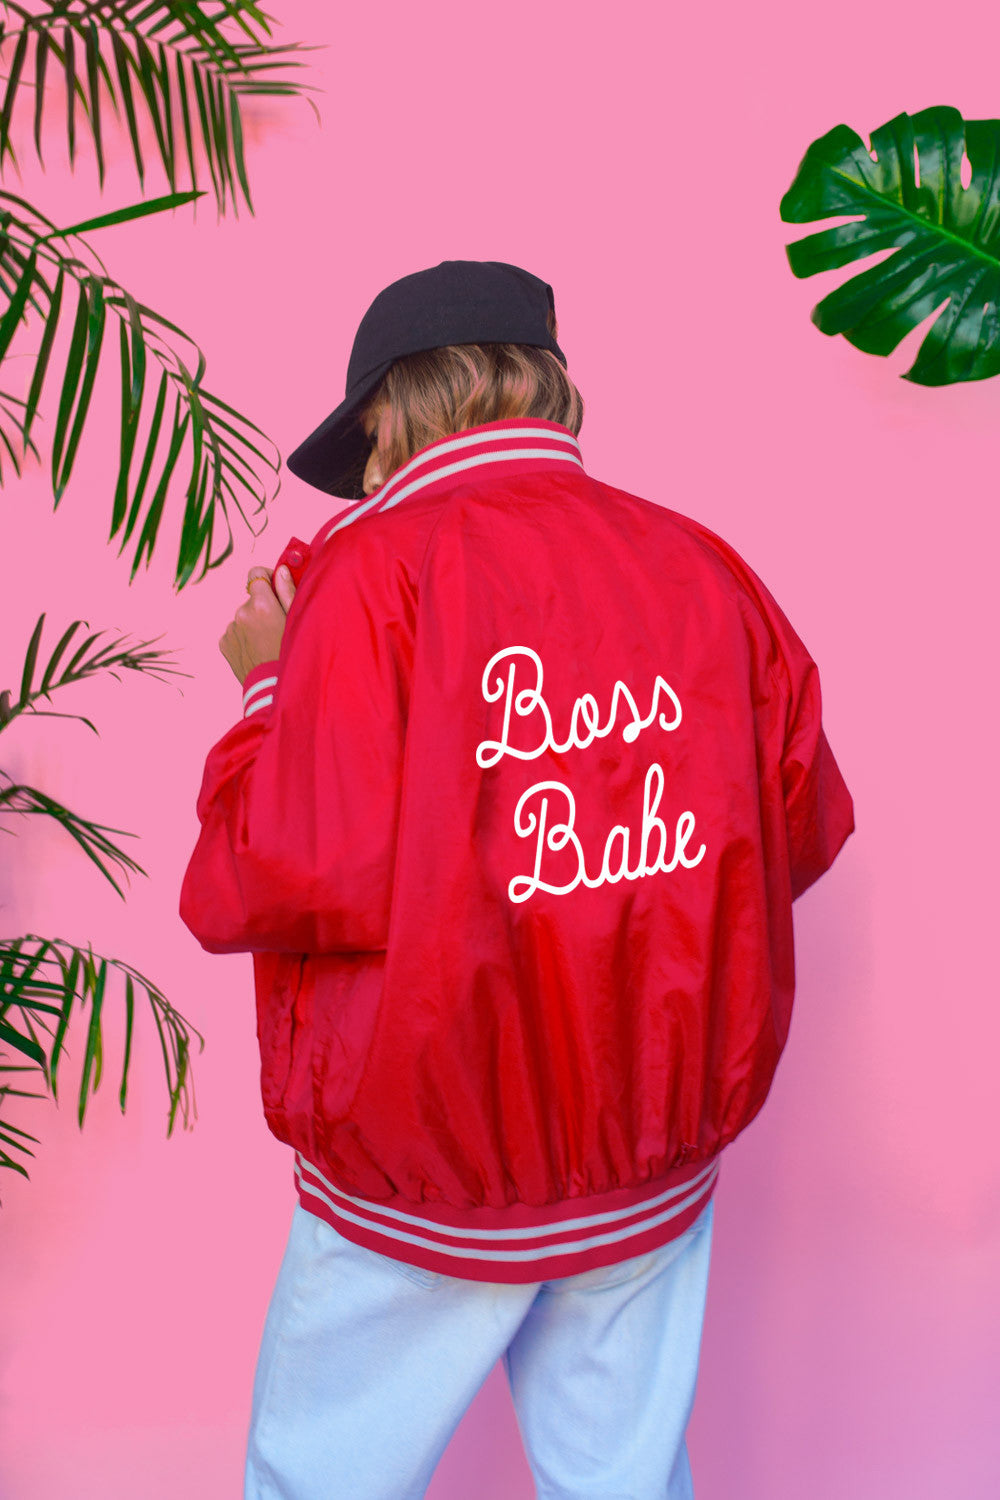 Boss Babe Jacket by TasteTheStyle – The 